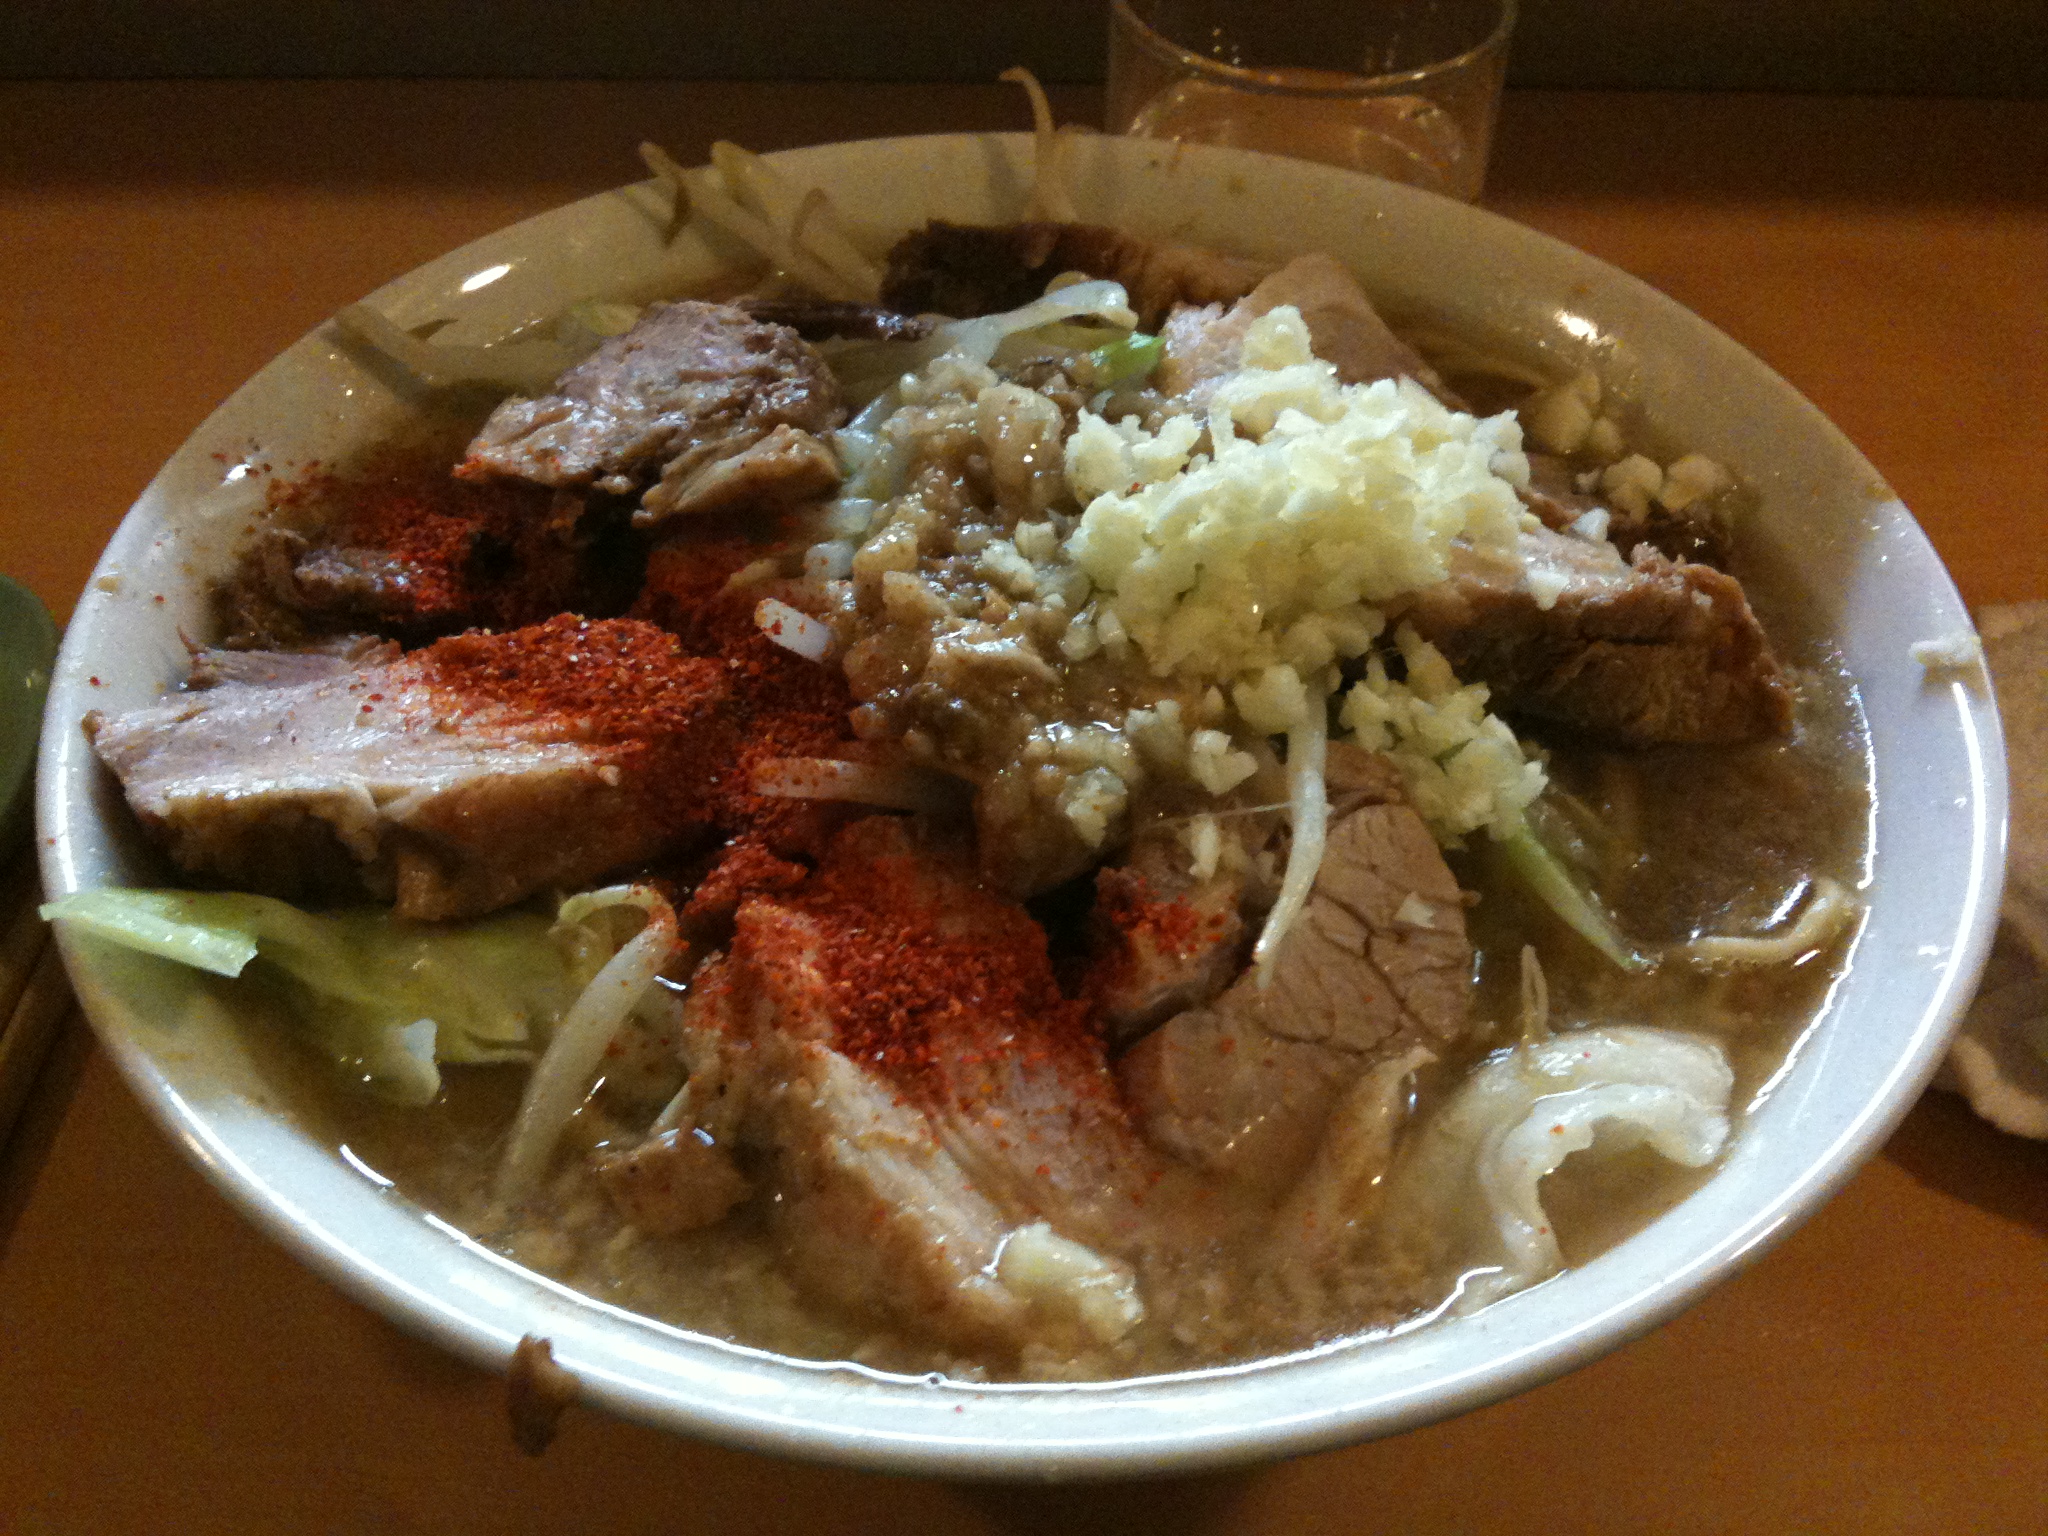 a bowl filled with different types of meat and vegetables